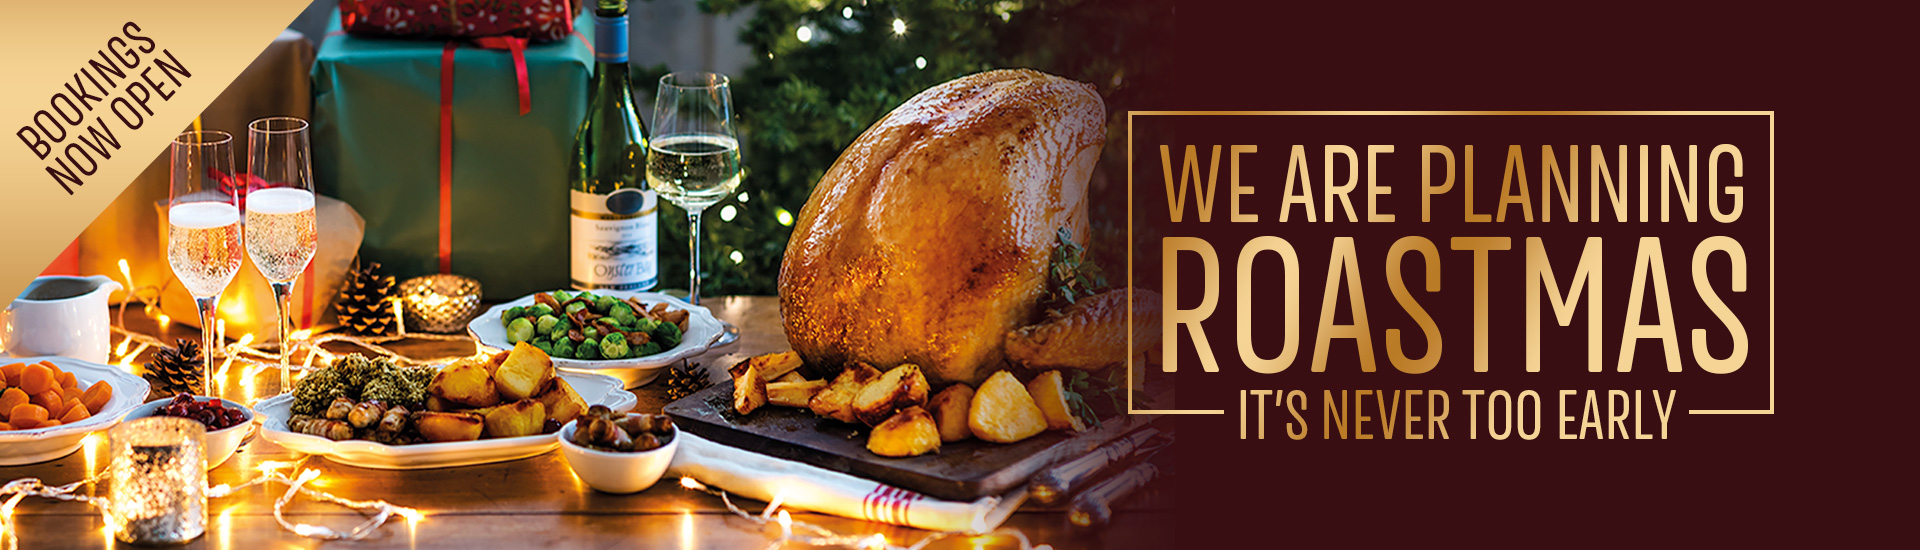 Christmas 2022 at your local Toby Carvery Whitewebbs House | Home of the Roast